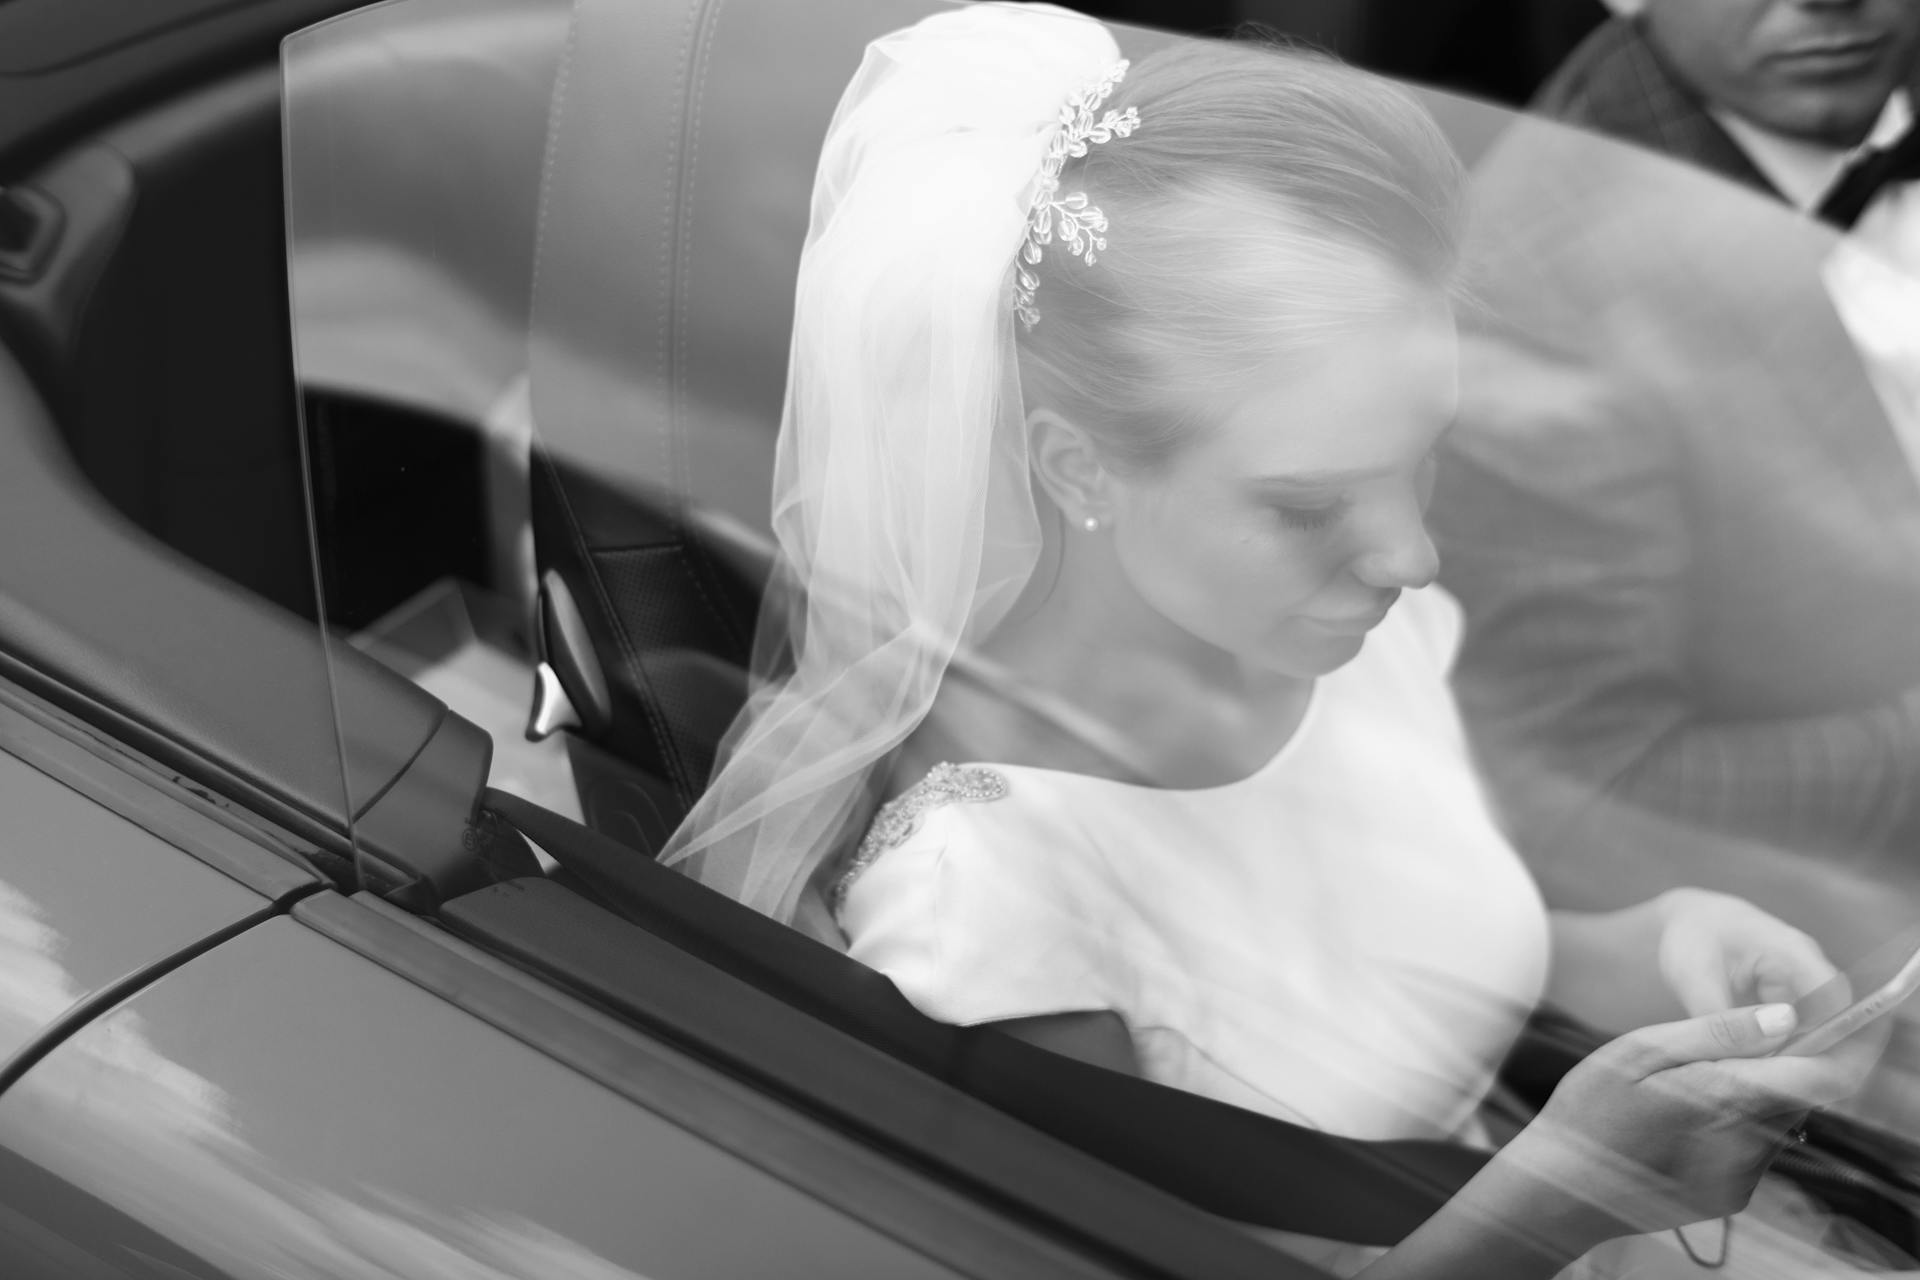 A bride and groom in a car | Source: Pexels